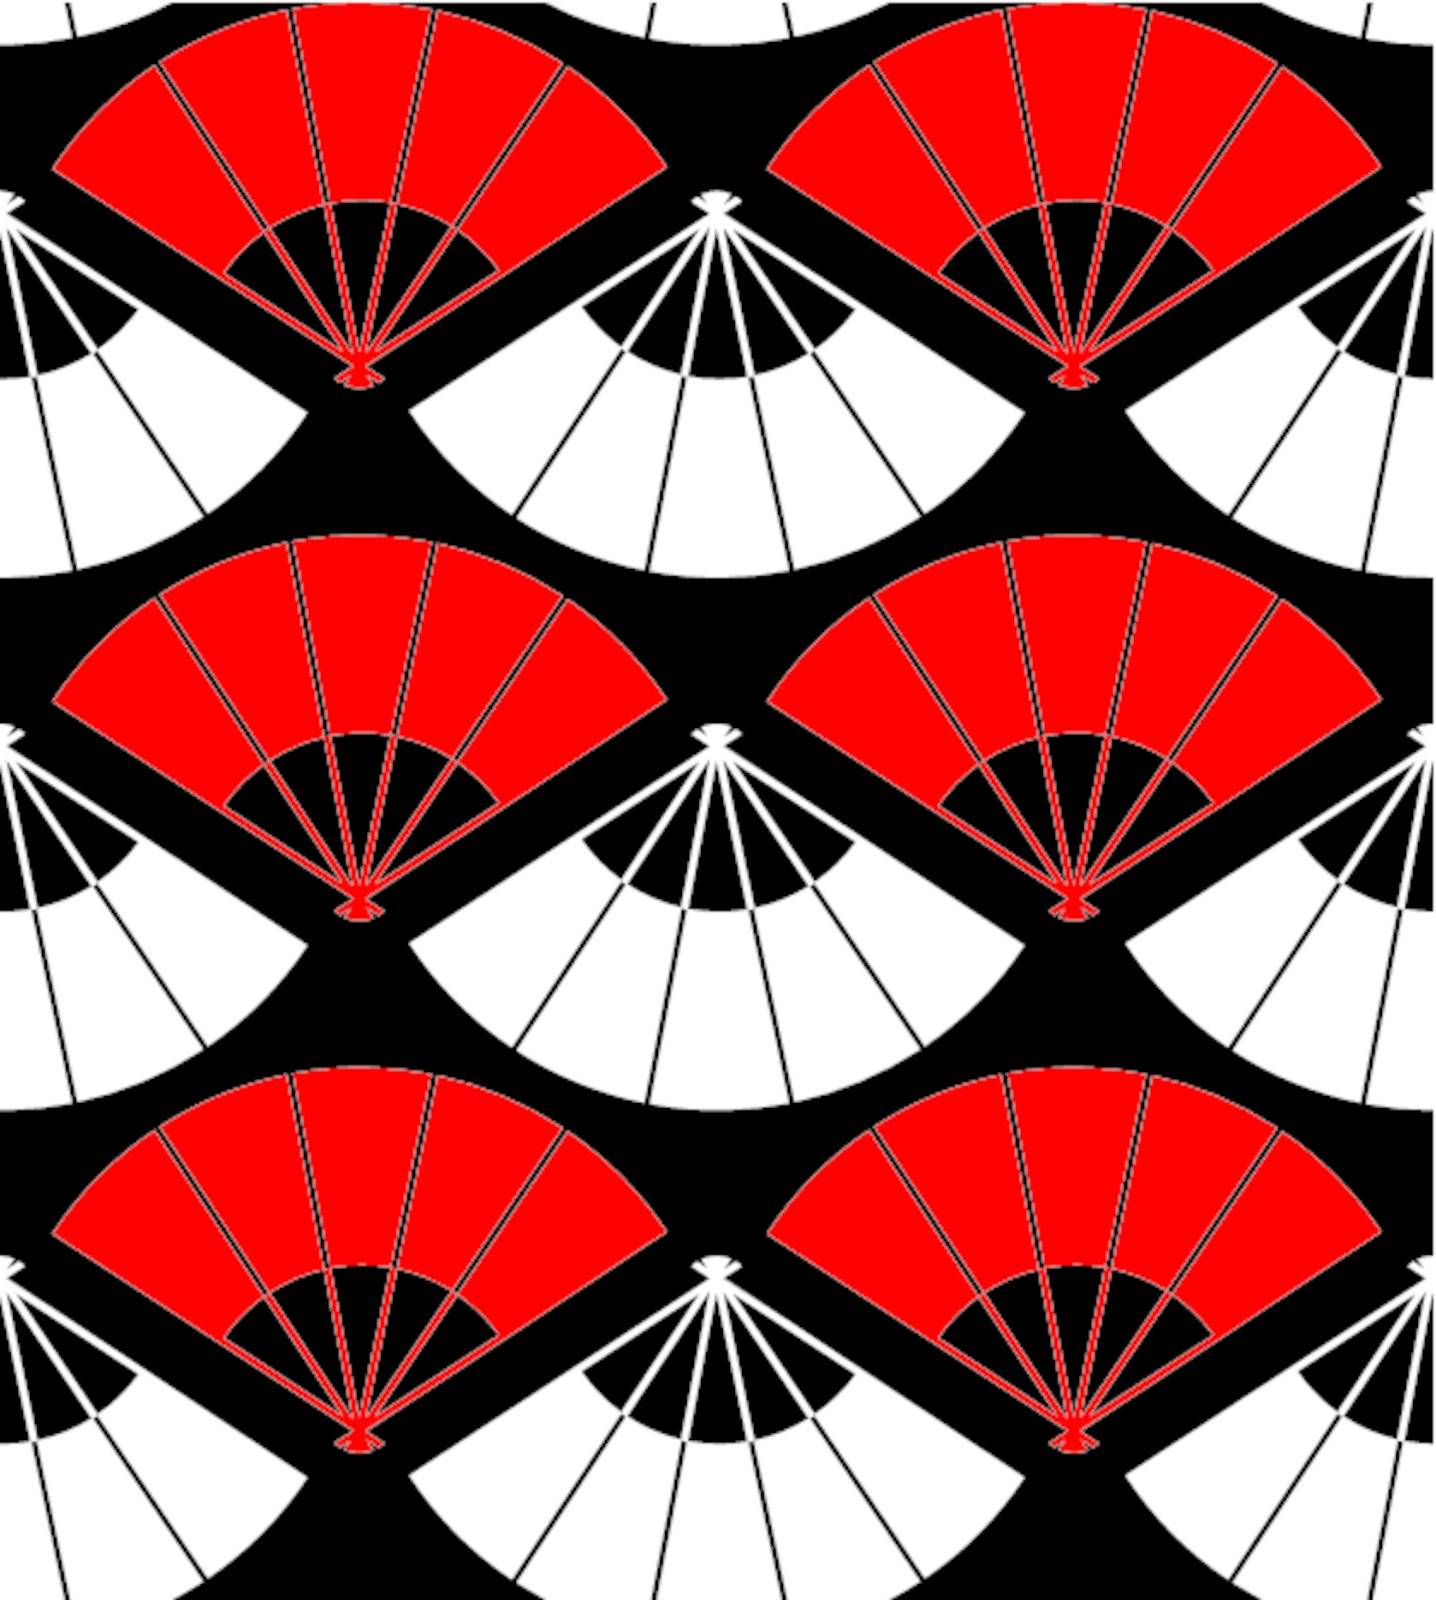 Japan fan abstract background in red, white and black. Vector file also available.